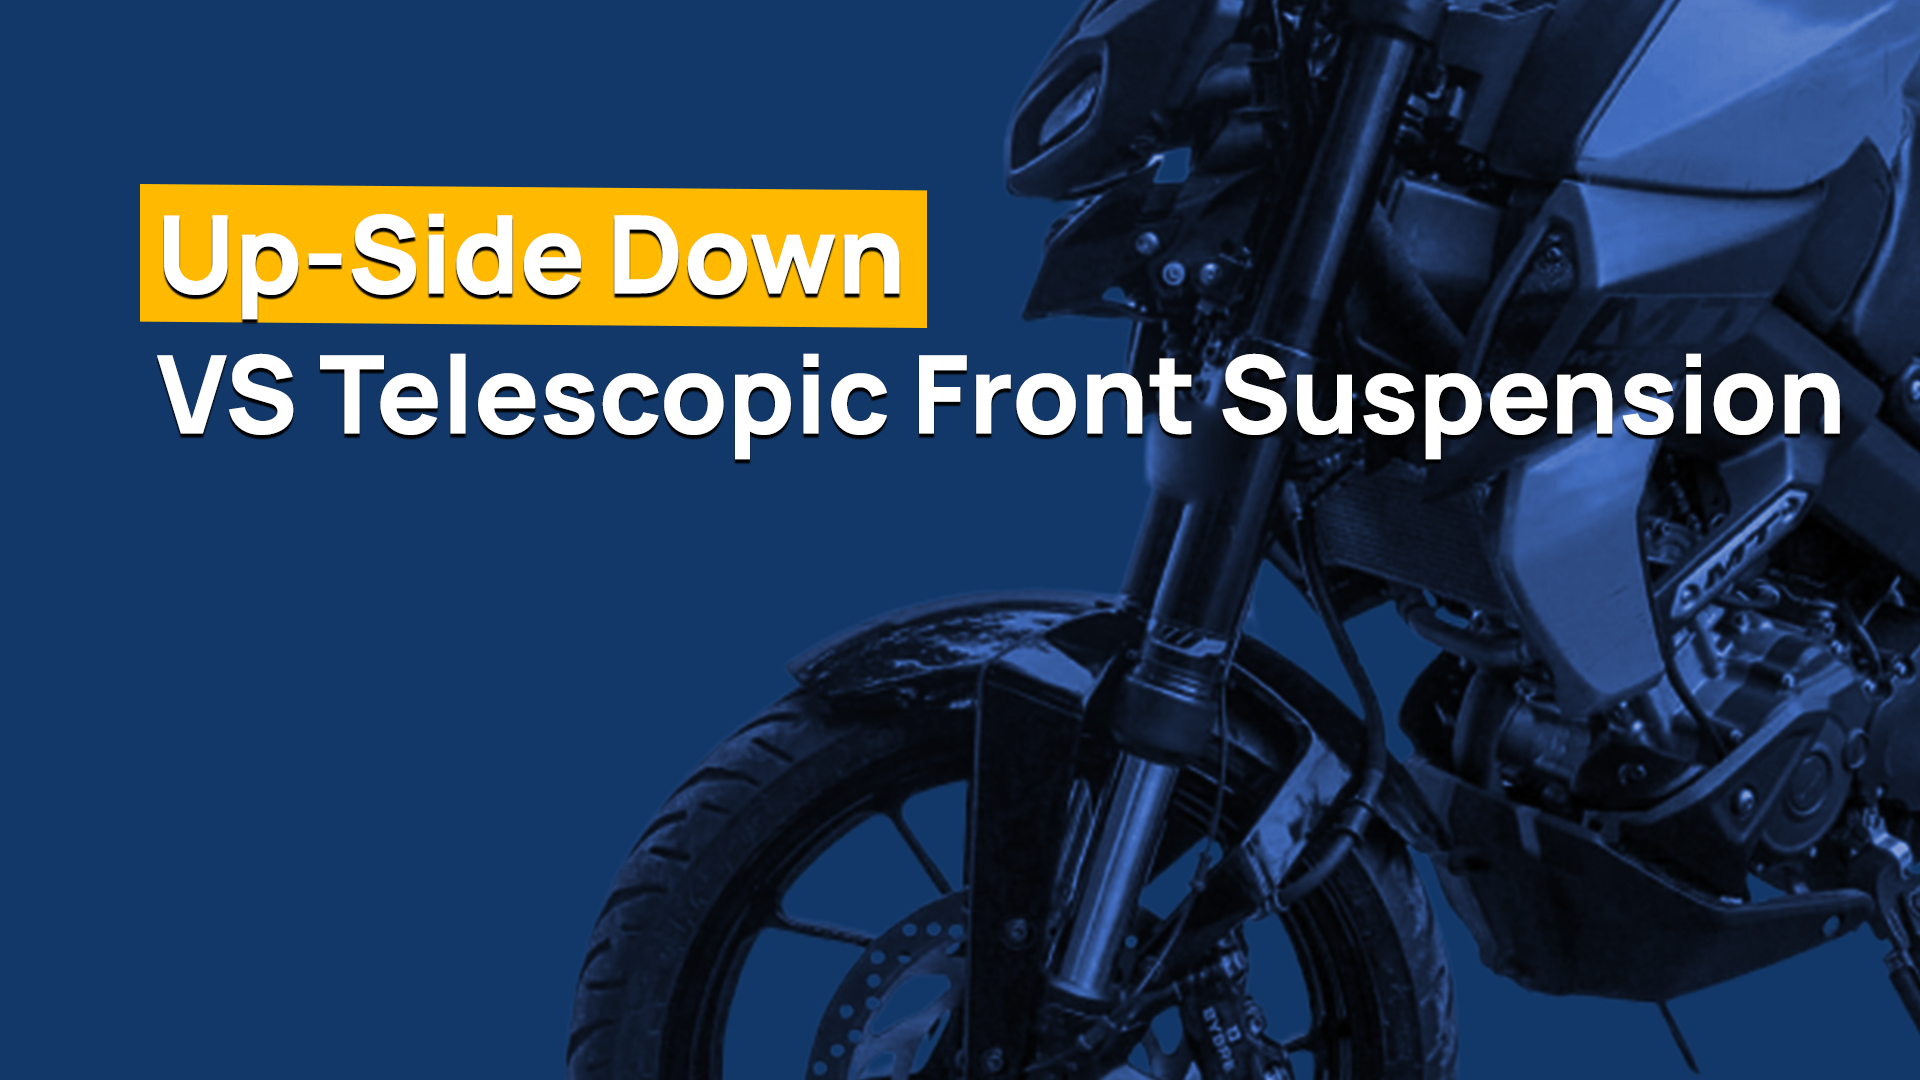 Up-Side Down VS Telescopic Front Suspension